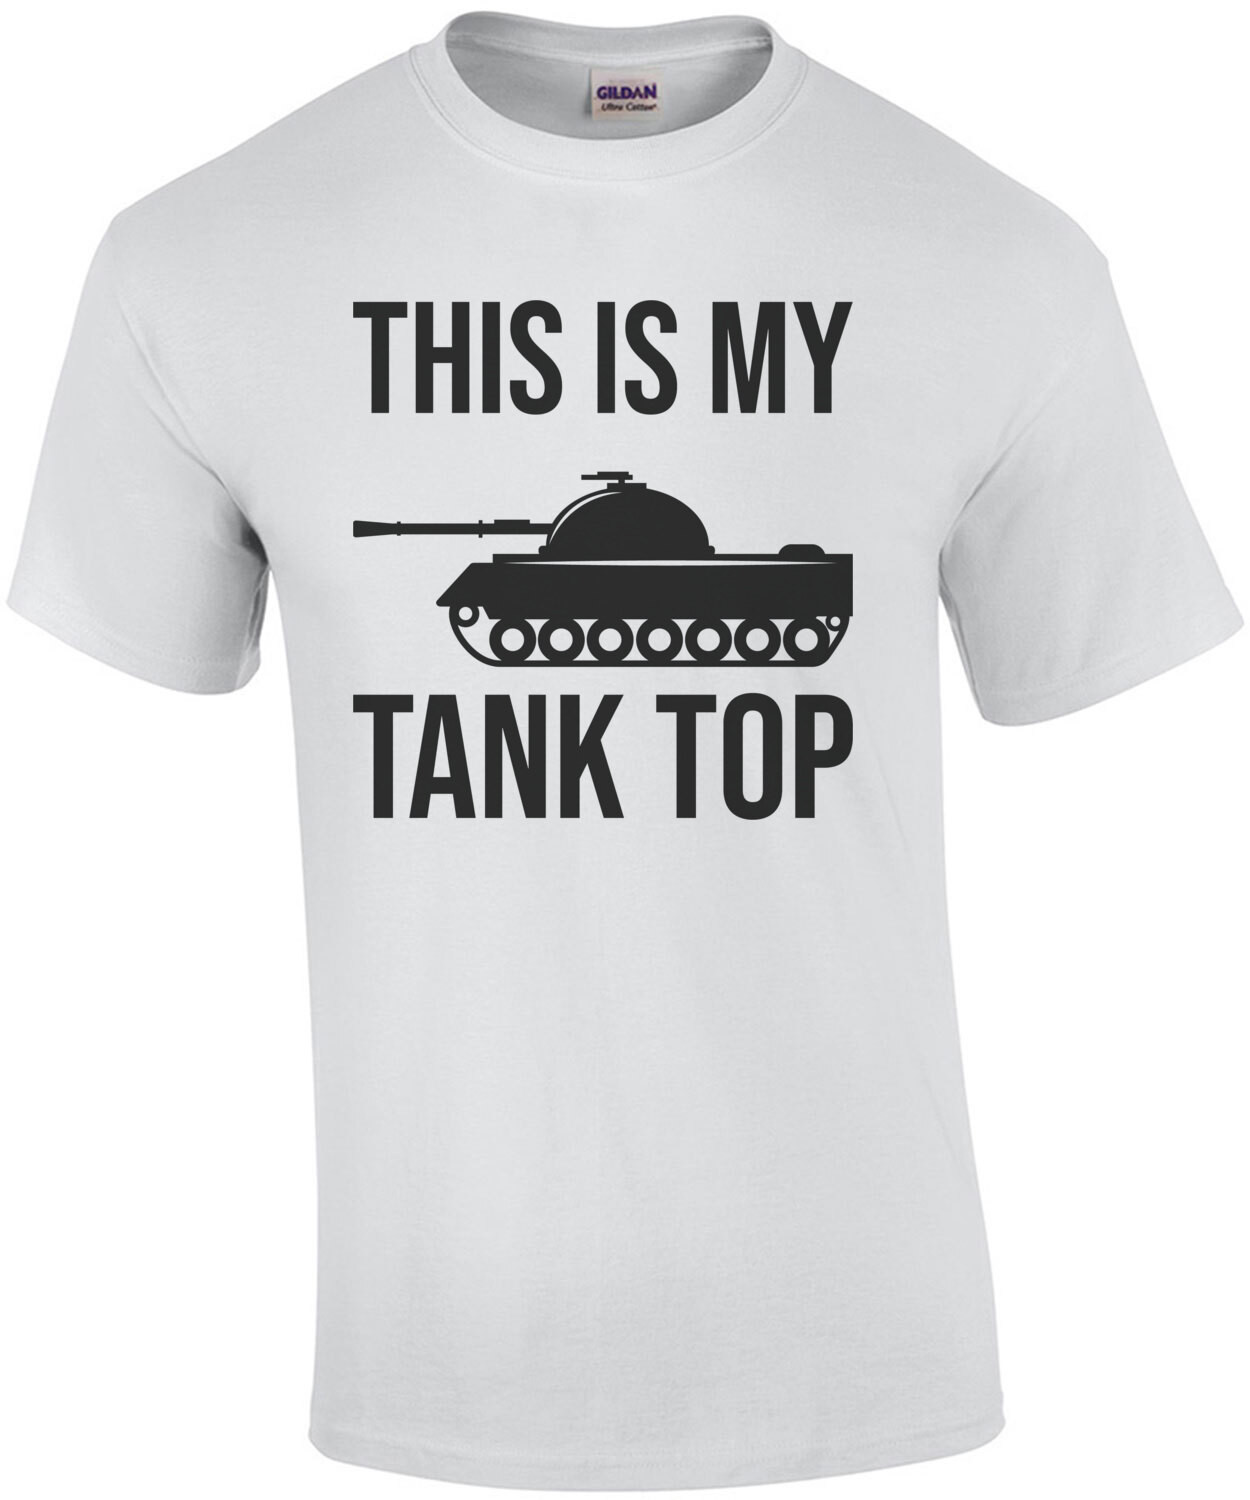 This is my tank top. Funny pun t-shirt